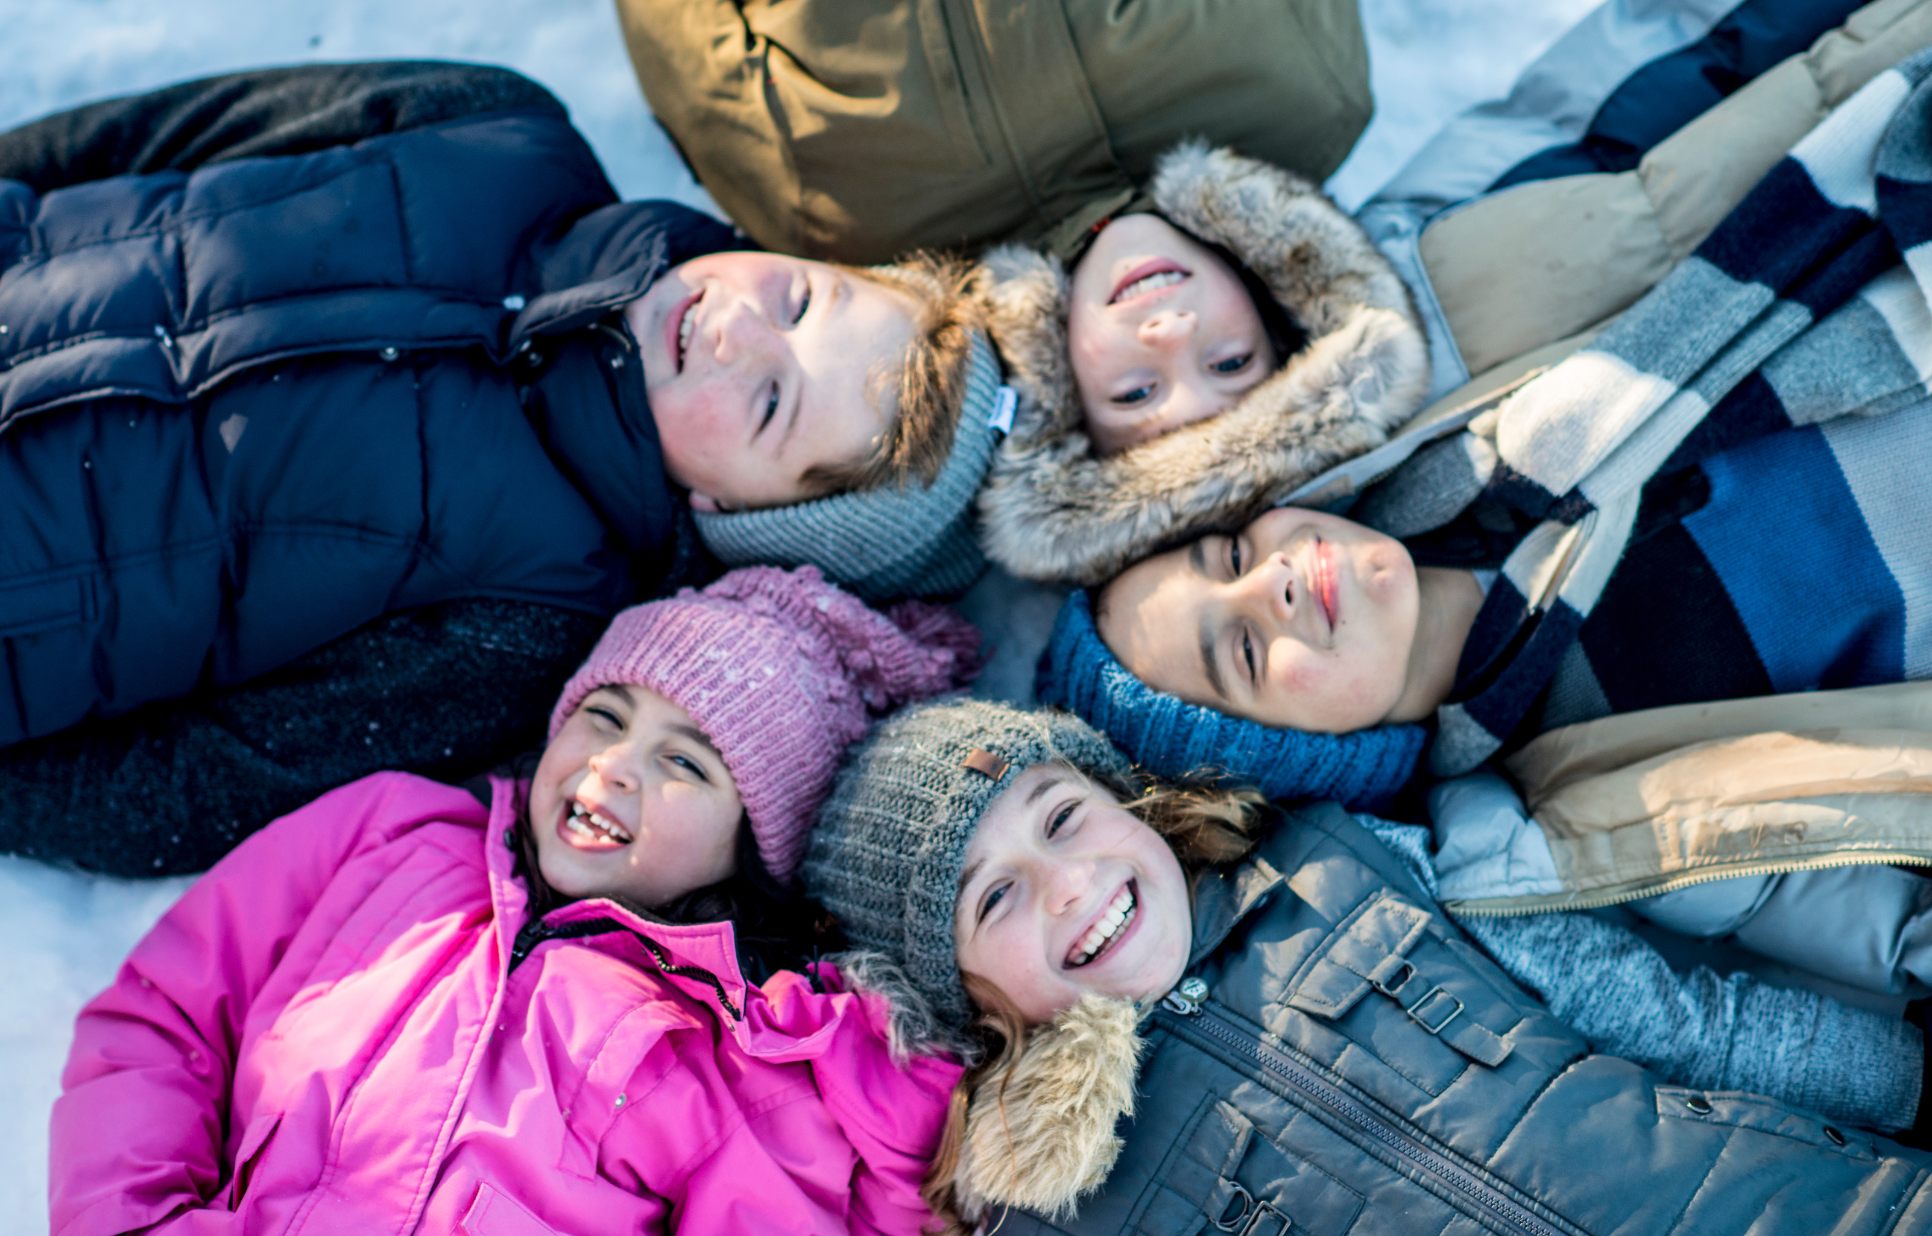 6 Winter Safety Tips for Kids Who Play Outside and Participate in Cold Weather Sports